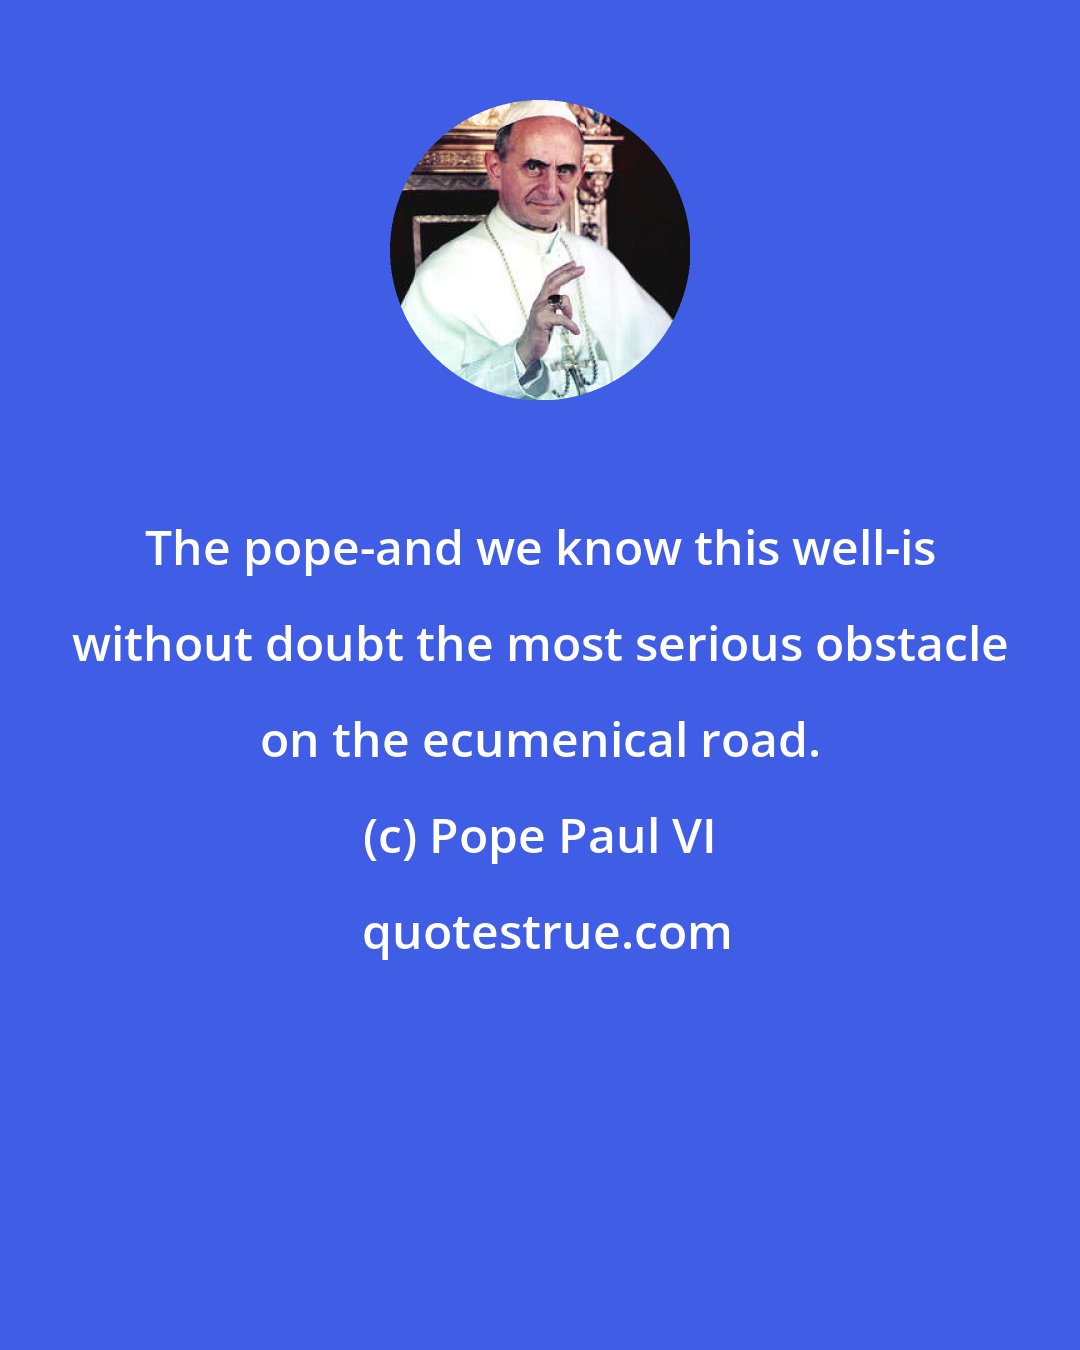 Pope Paul VI: The pope-and we know this well-is without doubt the most serious obstacle on the ecumenical road.